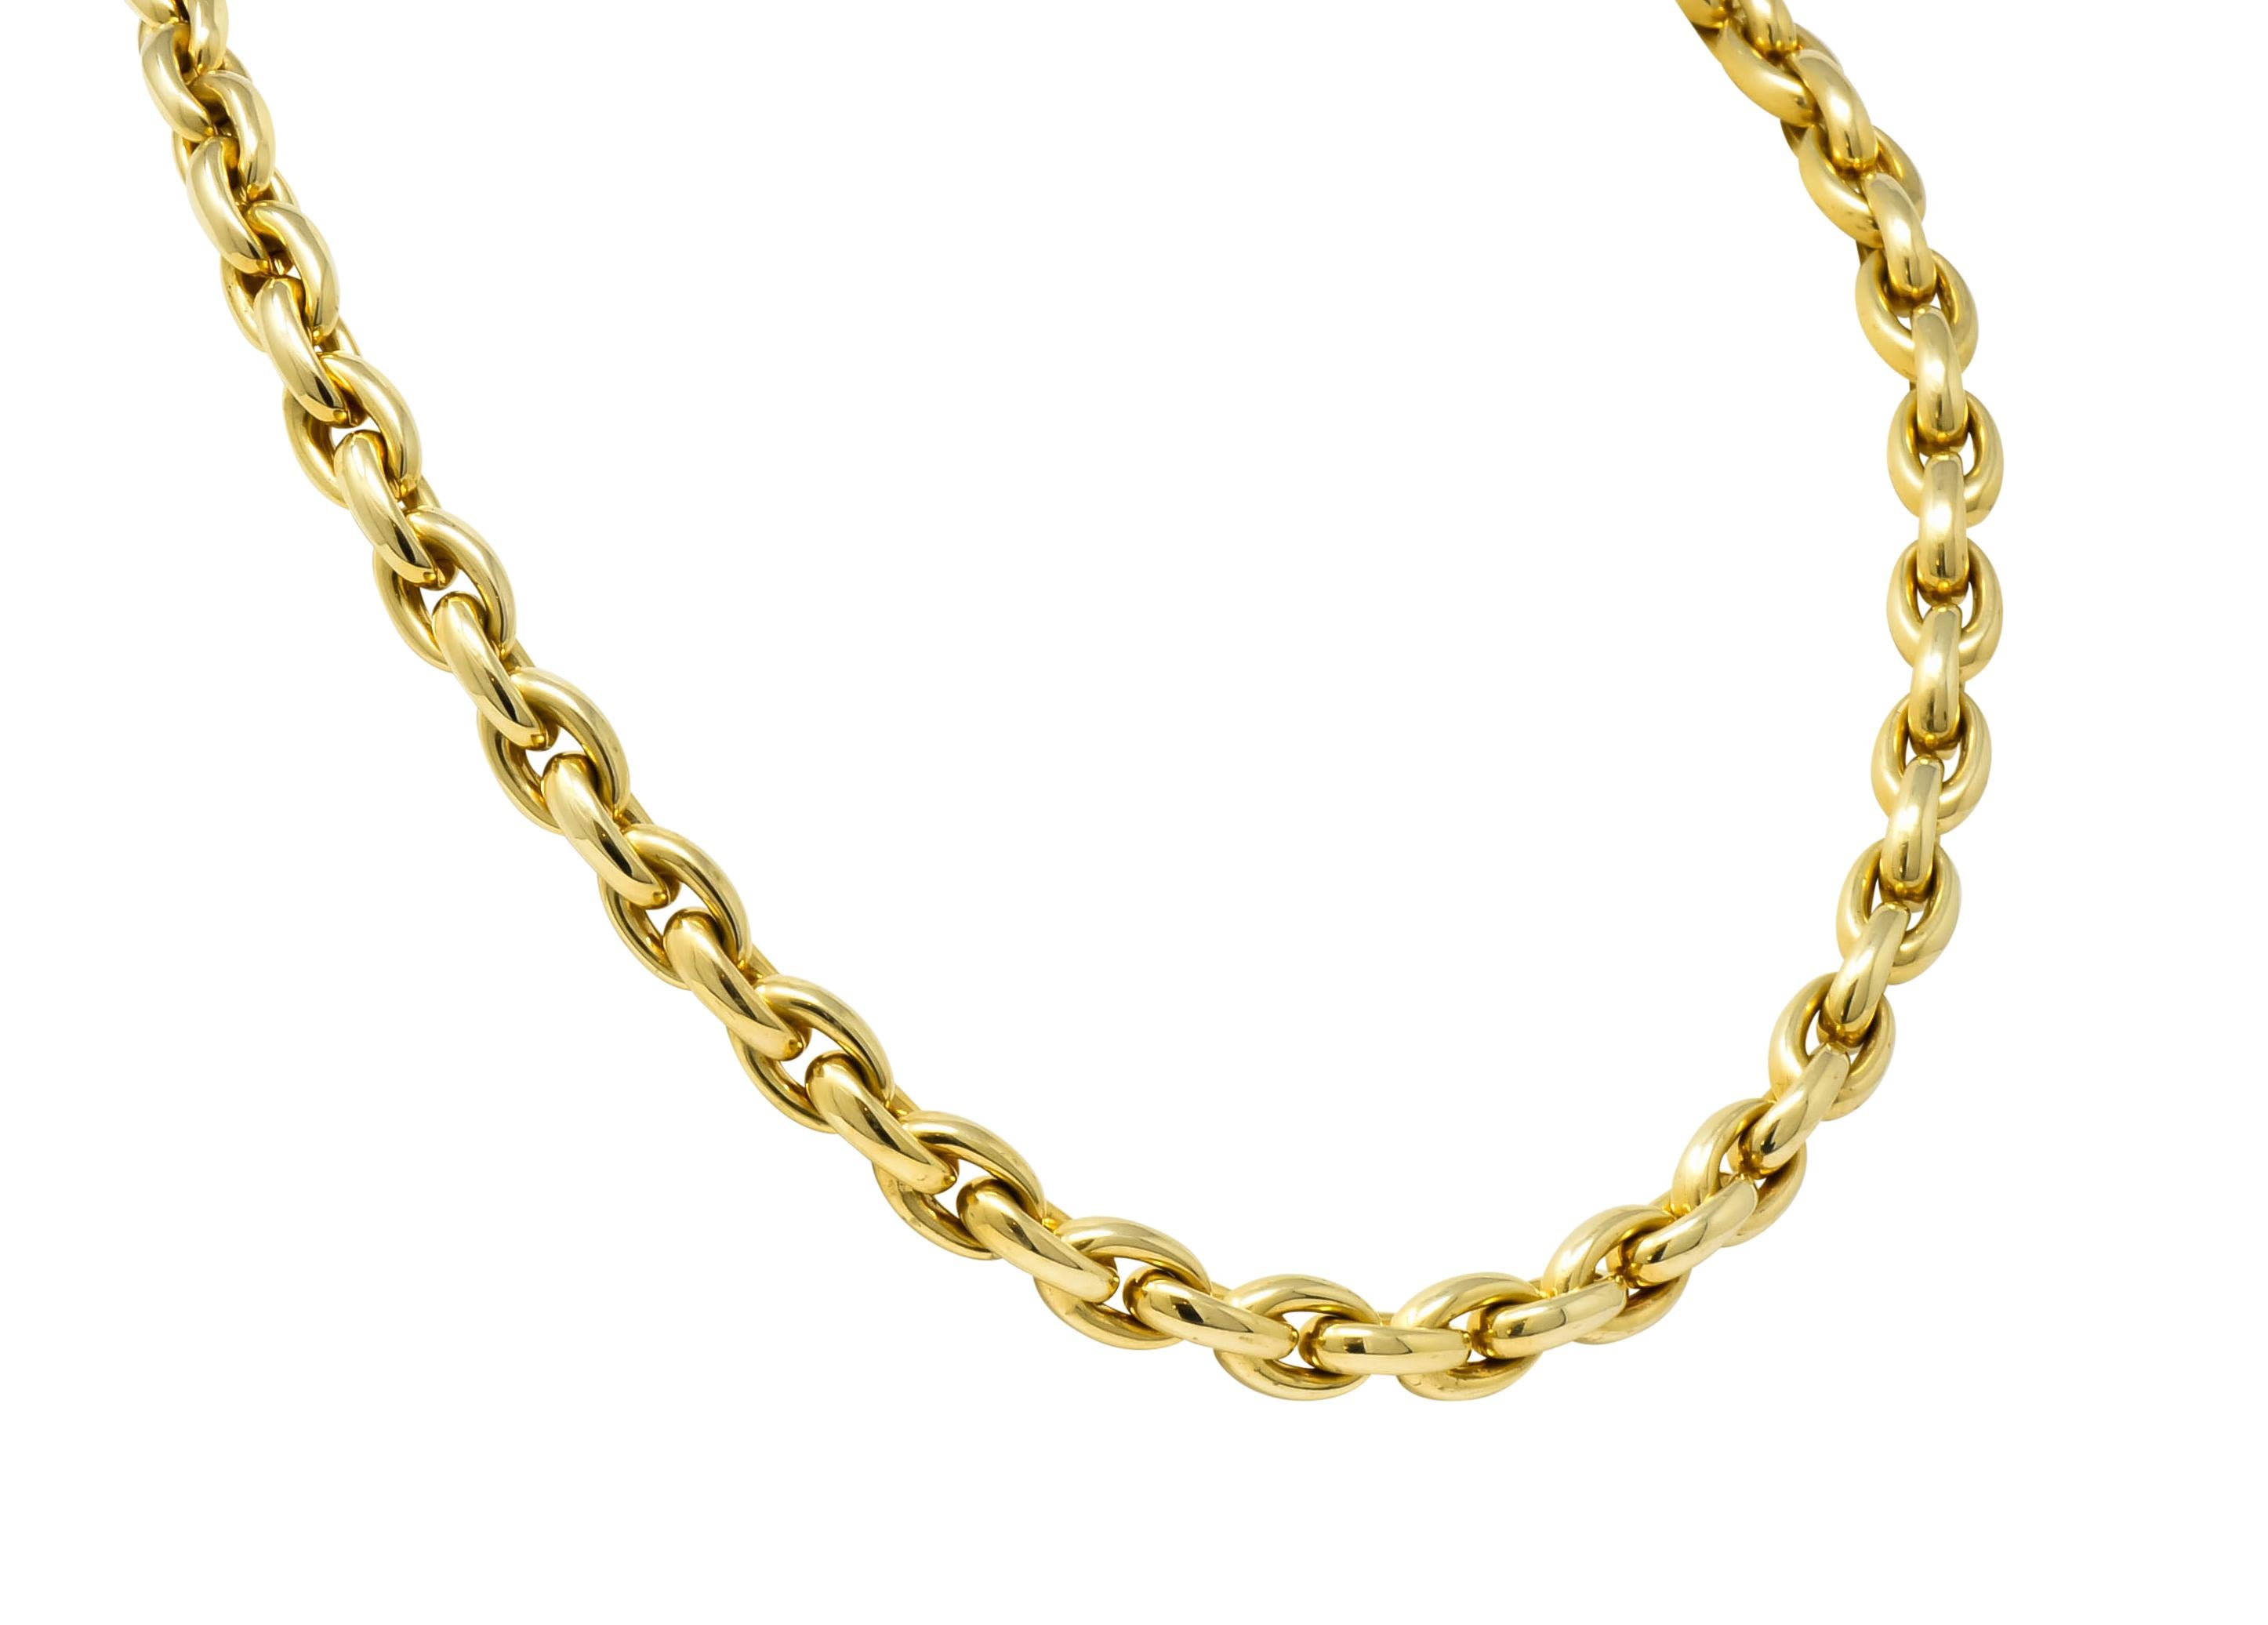 Necklace comprised of puffed mariner style links 

With a bright polished gold finish

Completed by a stylized lobster clasp

With maker's mark and stamped Italy 14KT for 14 karat Italian gold

Length: 19 inches

Width: 3/8 inch

Total Weight: 54.4